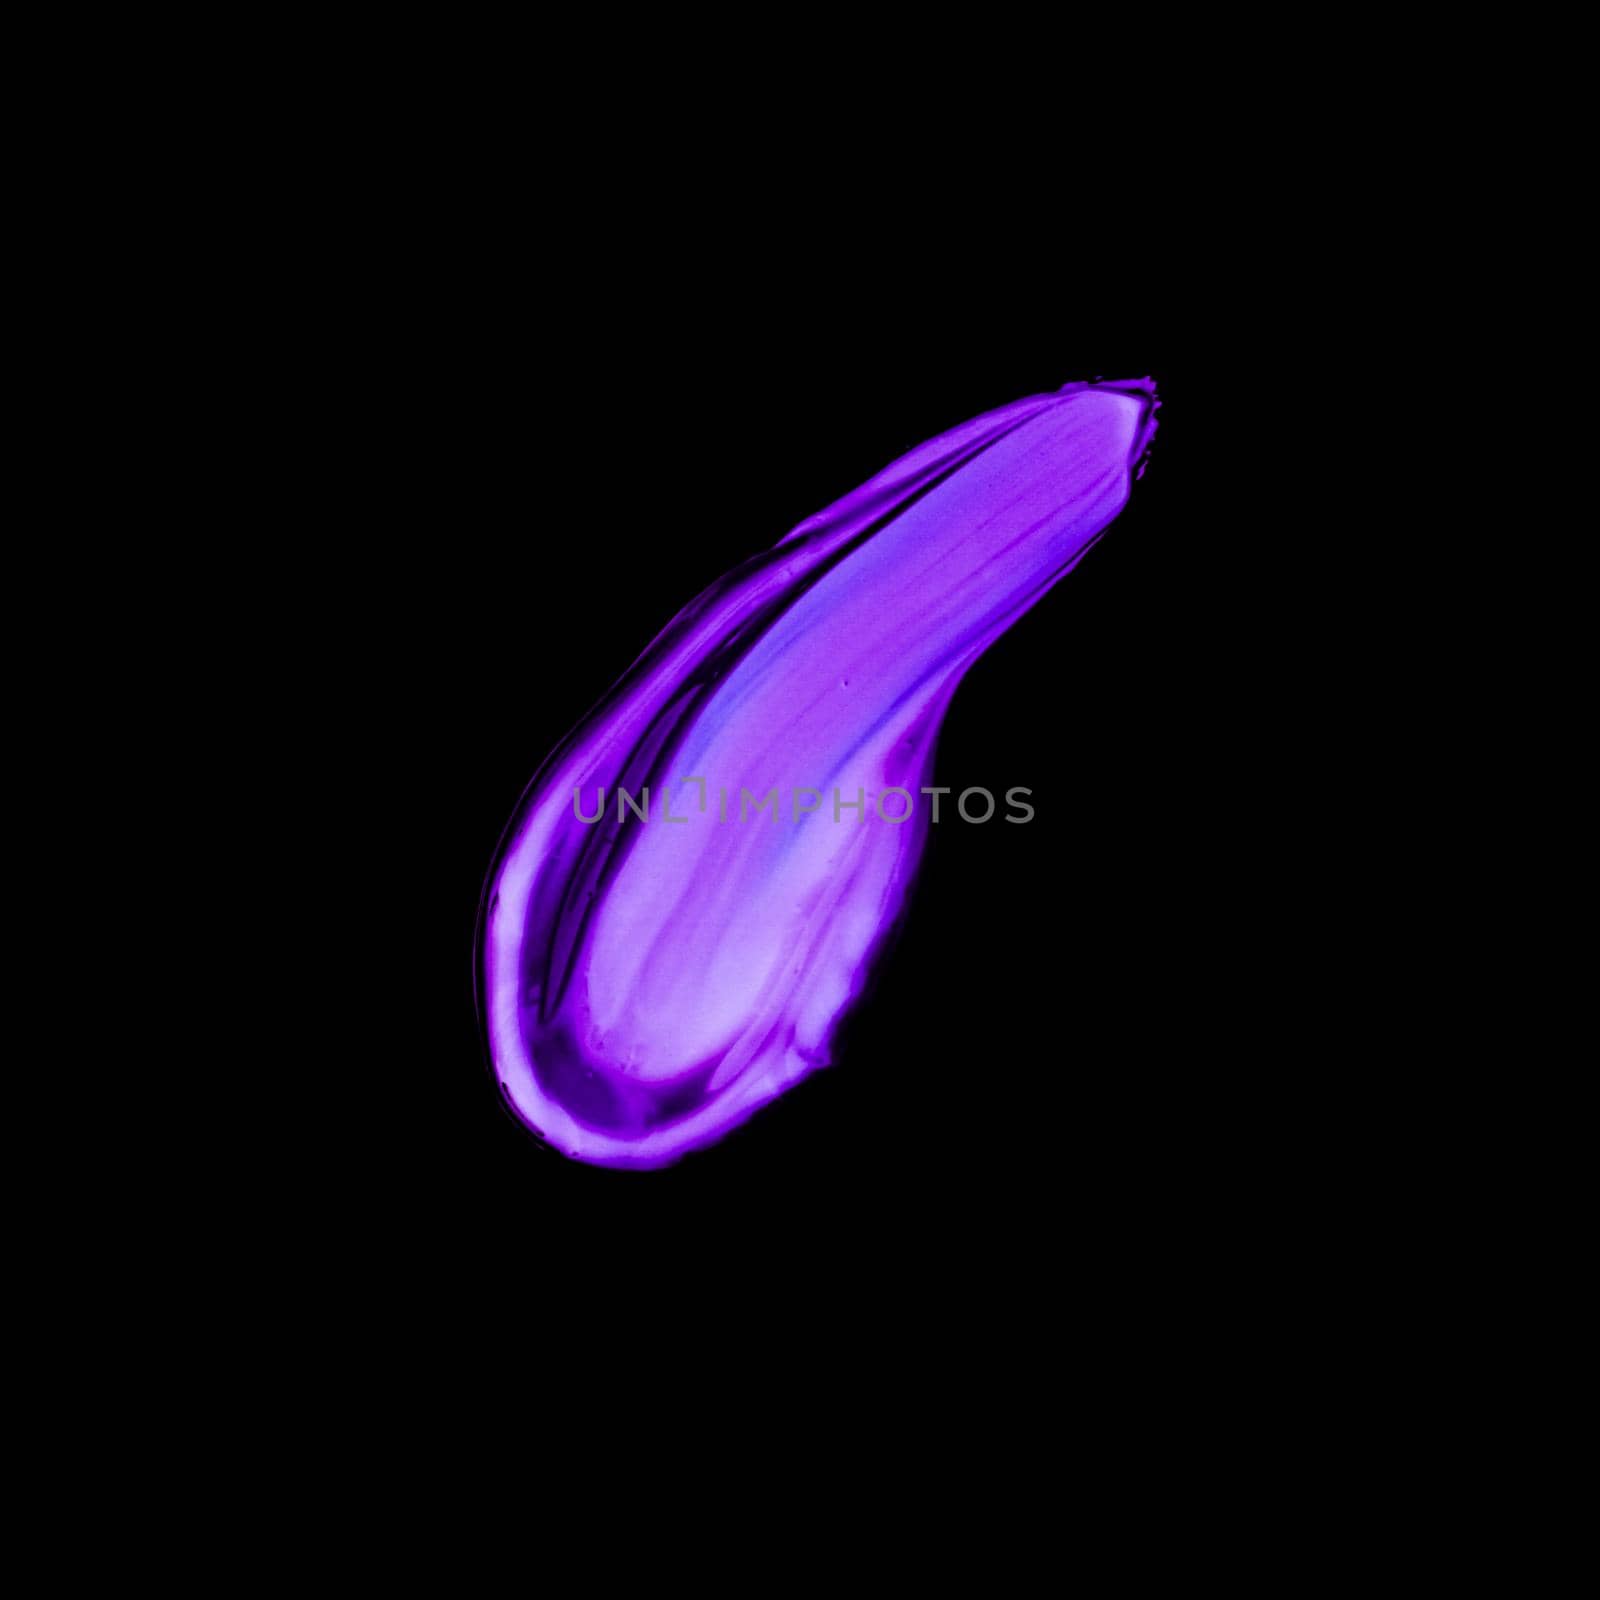 Art abstract, cosmetic product and hand painted design concept - Purple neon paint brush stroke texture isolated on black background